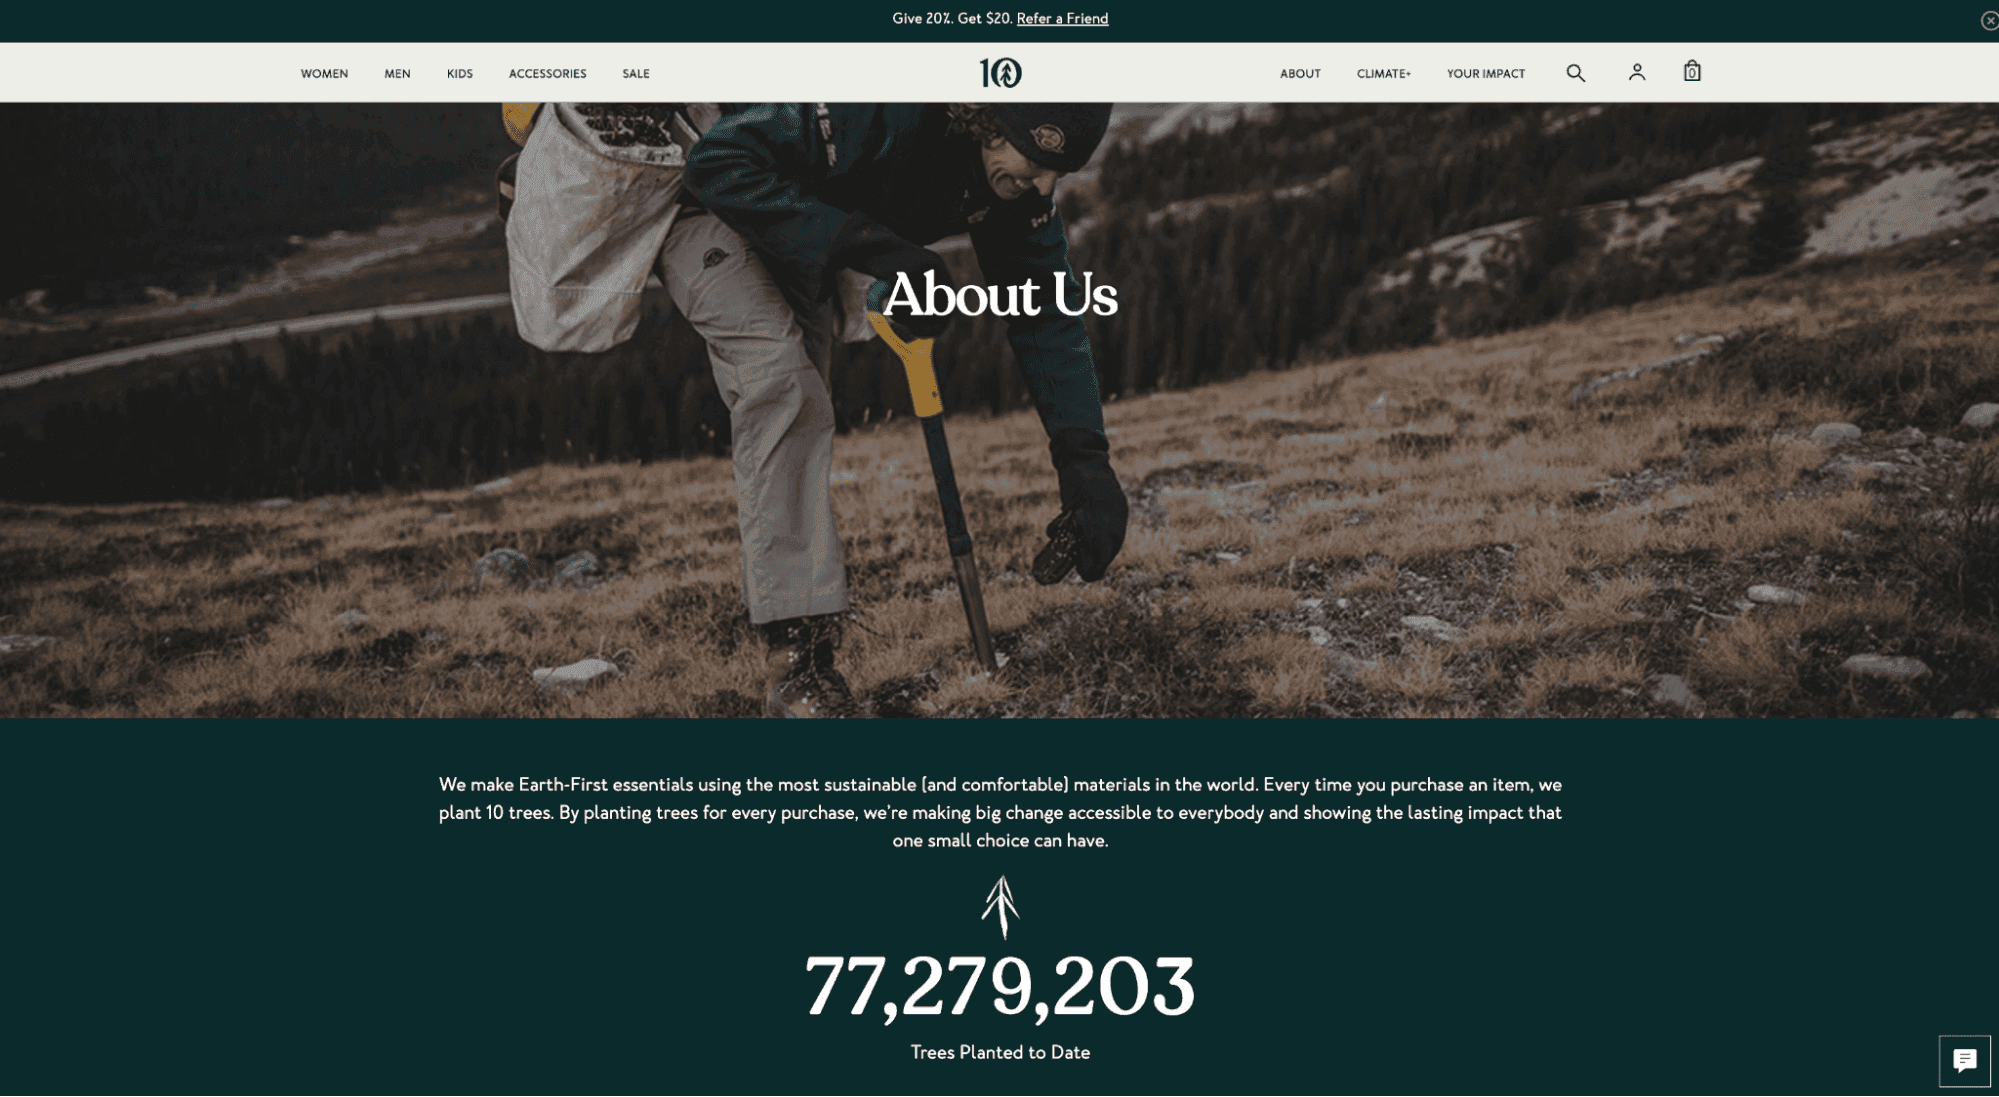 The "About Us" page of the TenTree website.